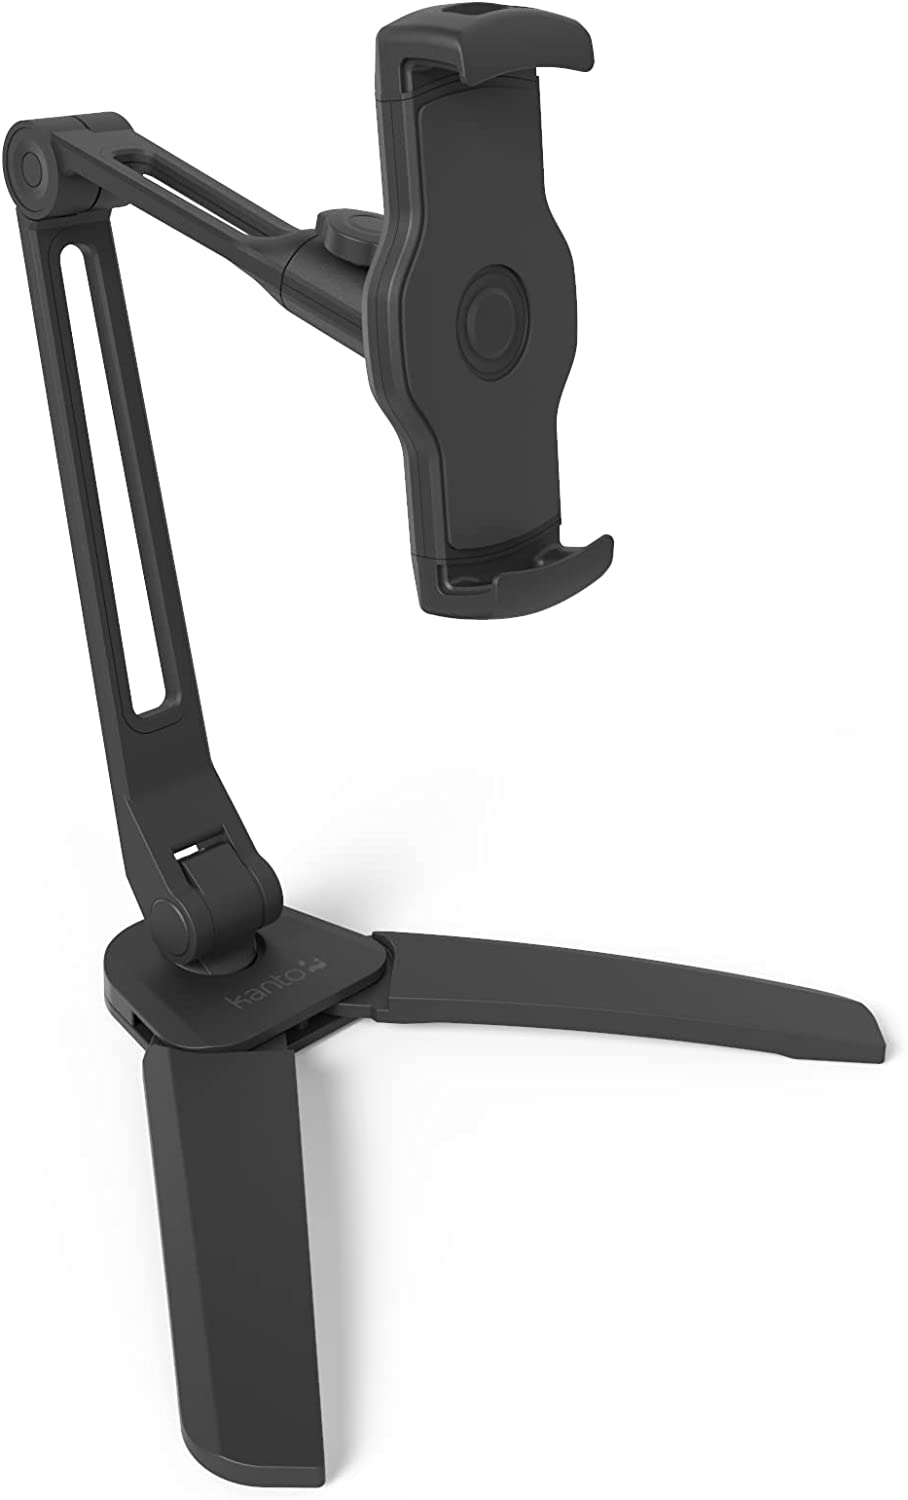 Kanto Universal Phone and Tablet Stand with Extended Arm and Mounting Bracket